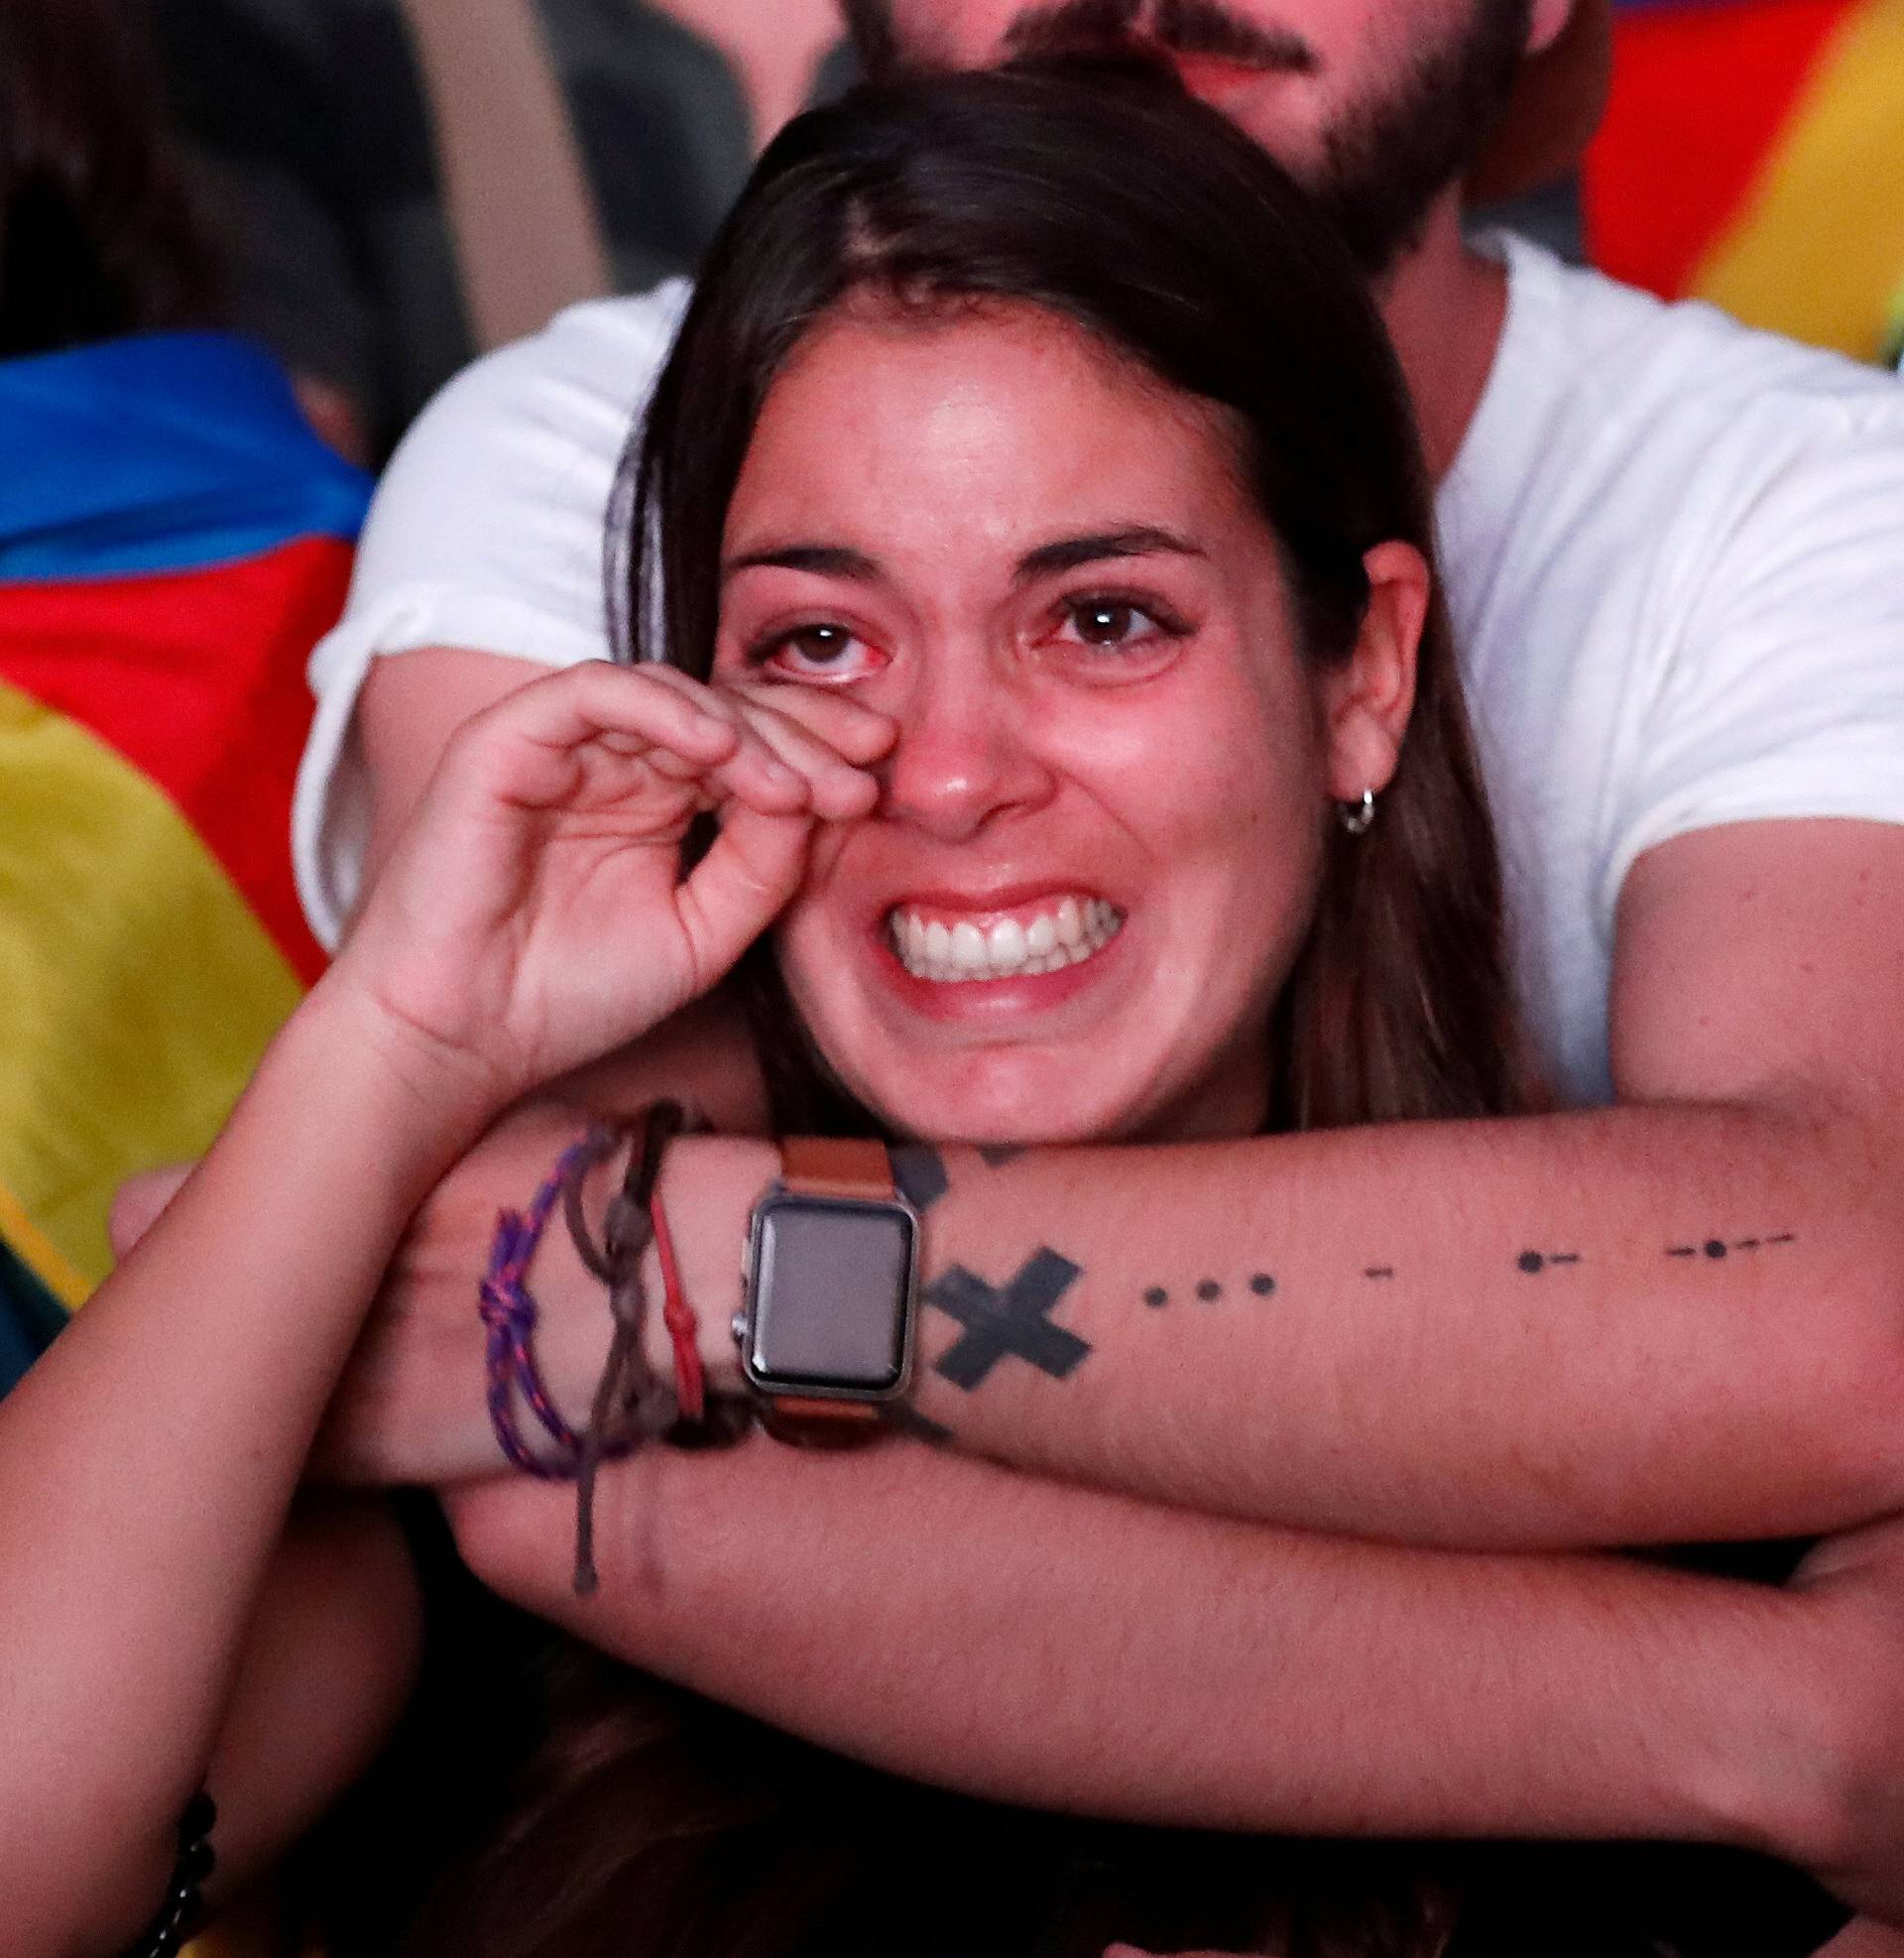 Woman reacts while watching Catalonian regional parliament session on giant screen in Barcelona